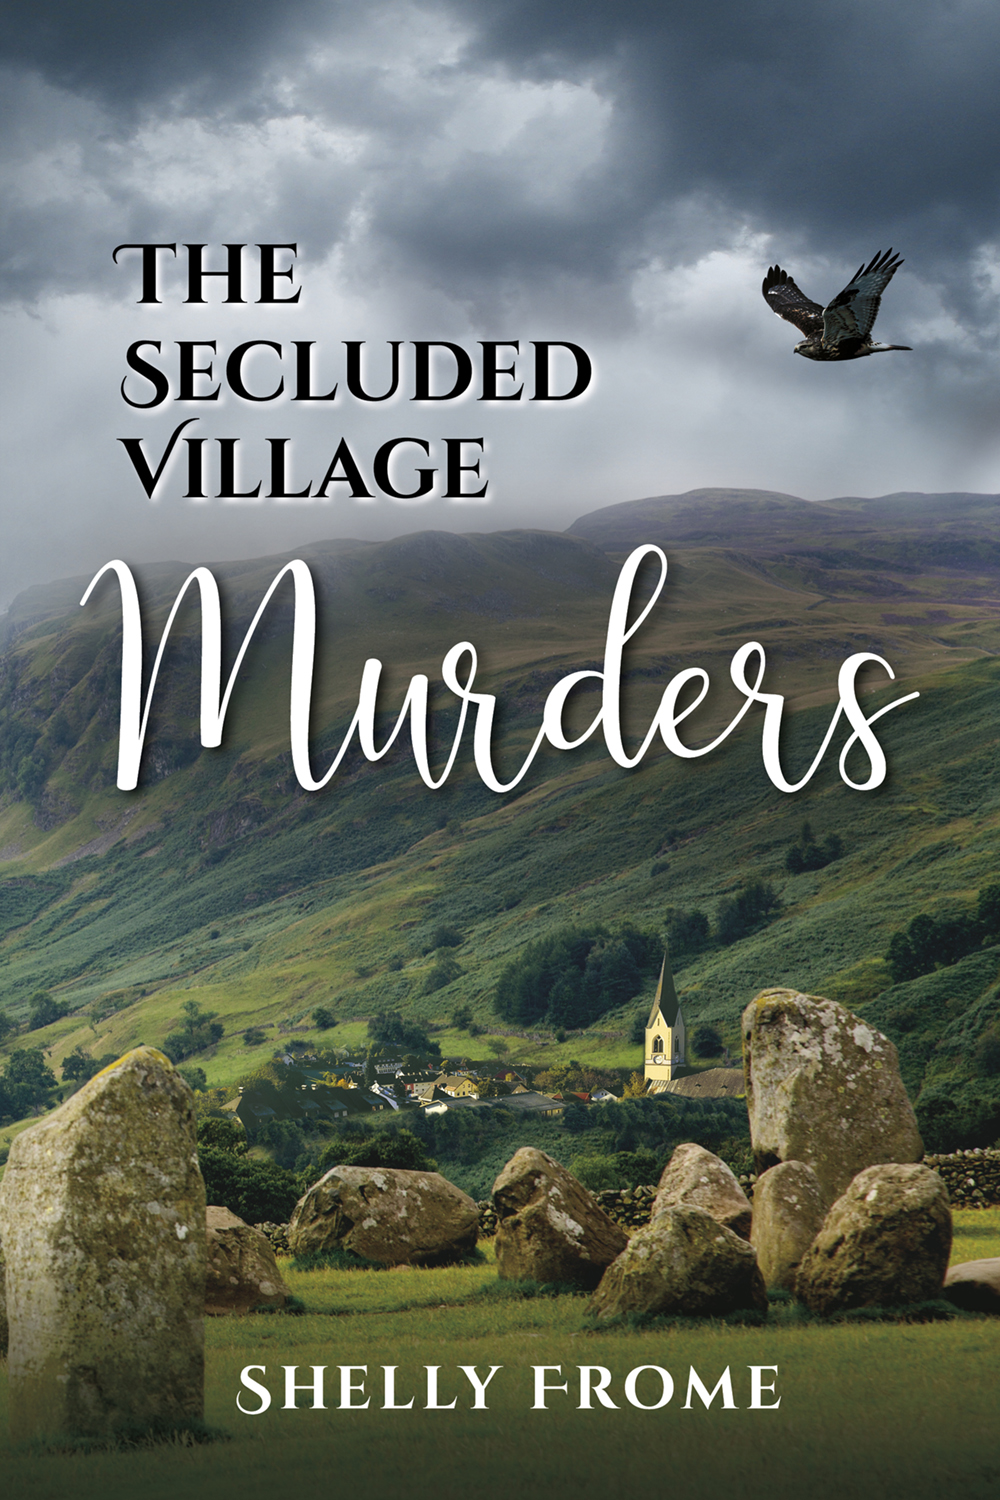 The Secluded Village Murders by Shelly Frome